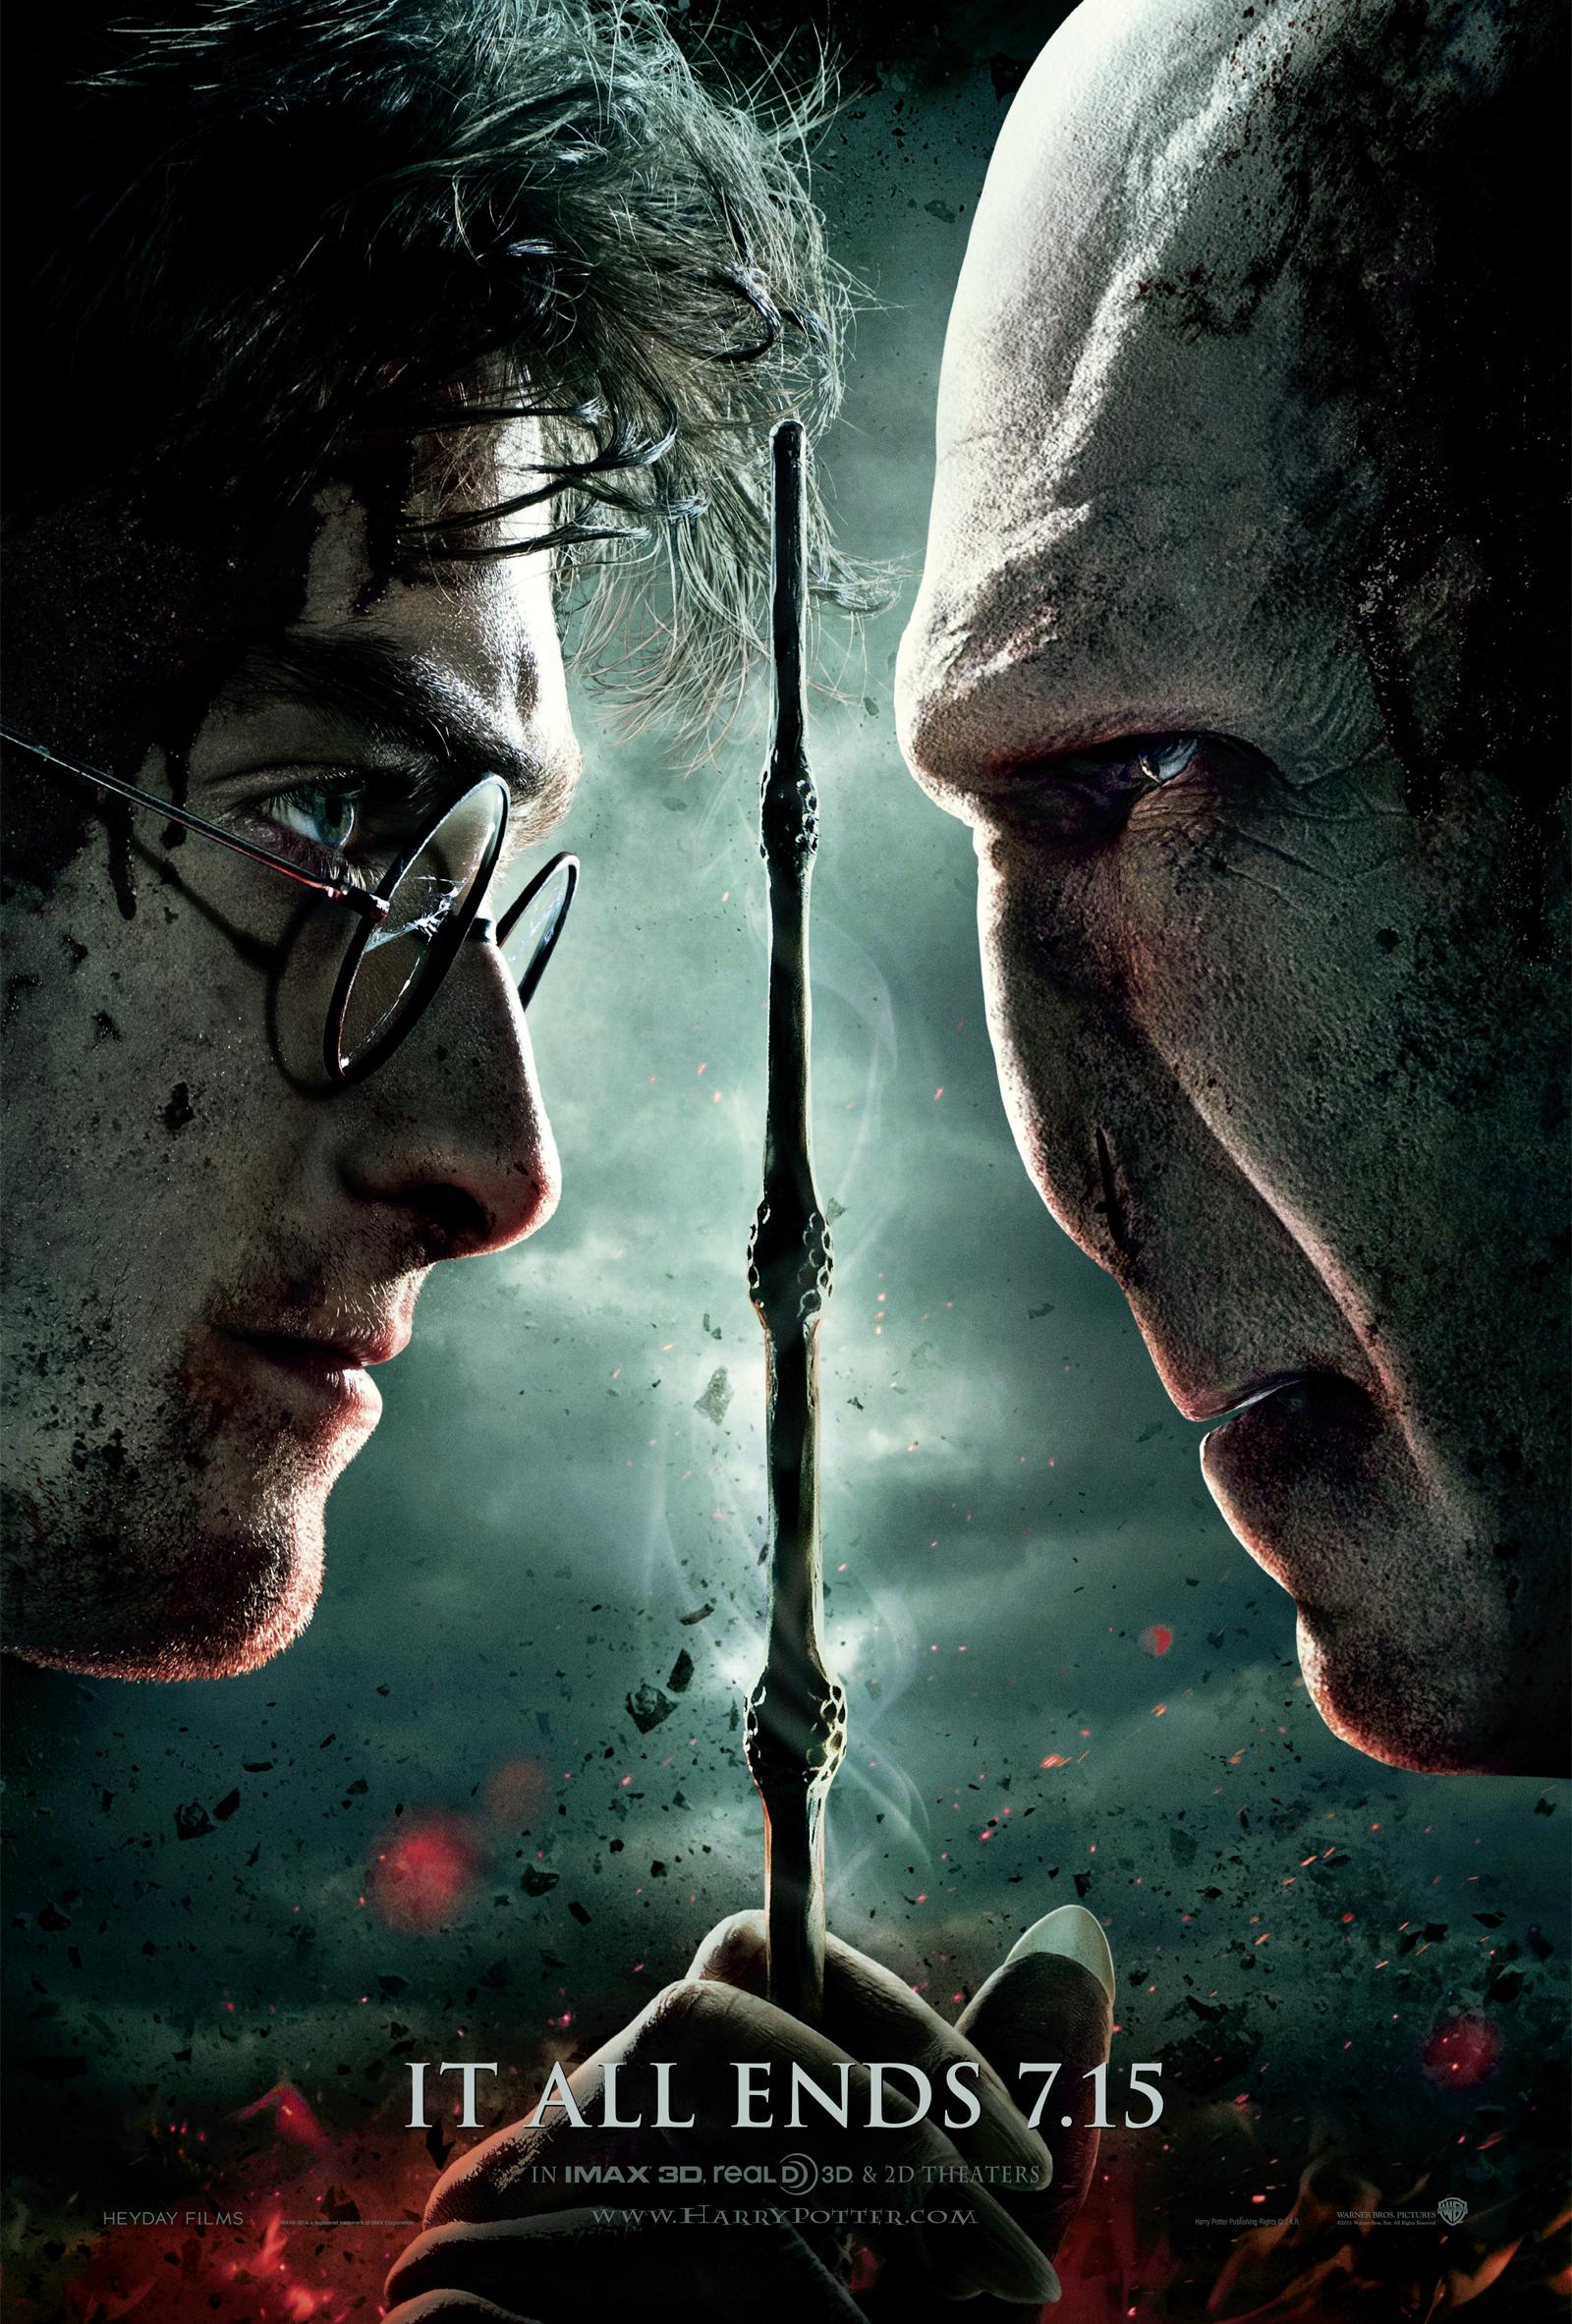 harry potter and the deathly hallows part 2 movie poster 01